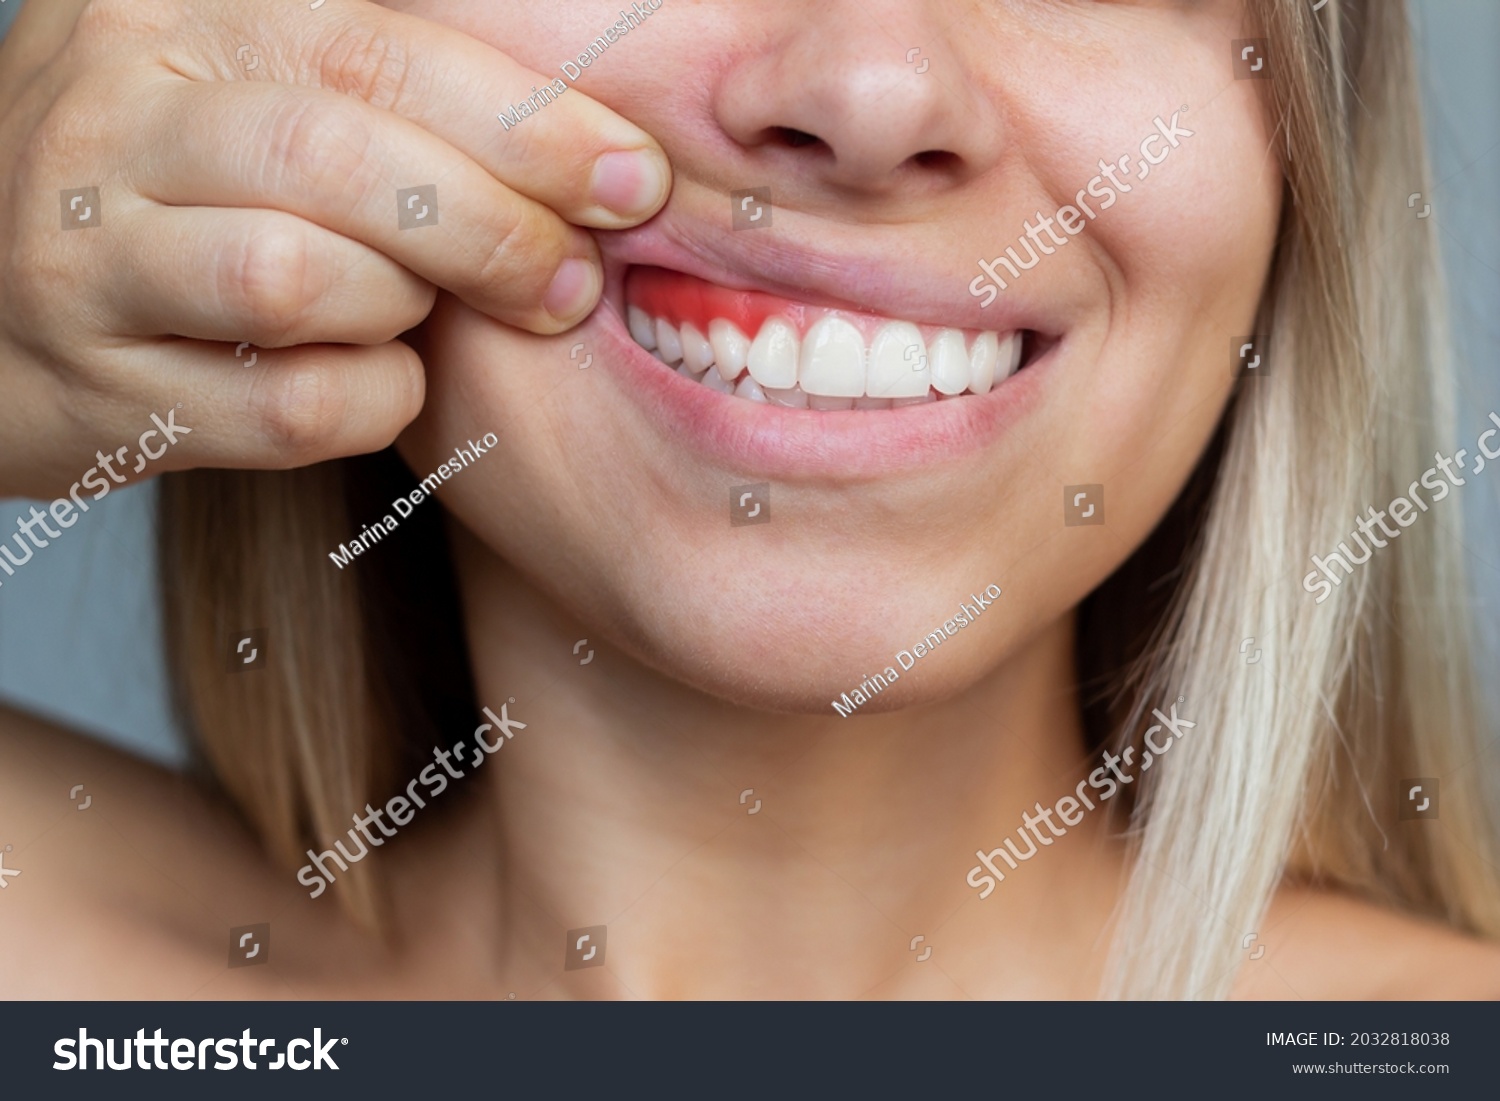 Gum inflammation. Close-up of a young woman showing bleeding gums on a gray background. Dentistry, dental care #2032818038